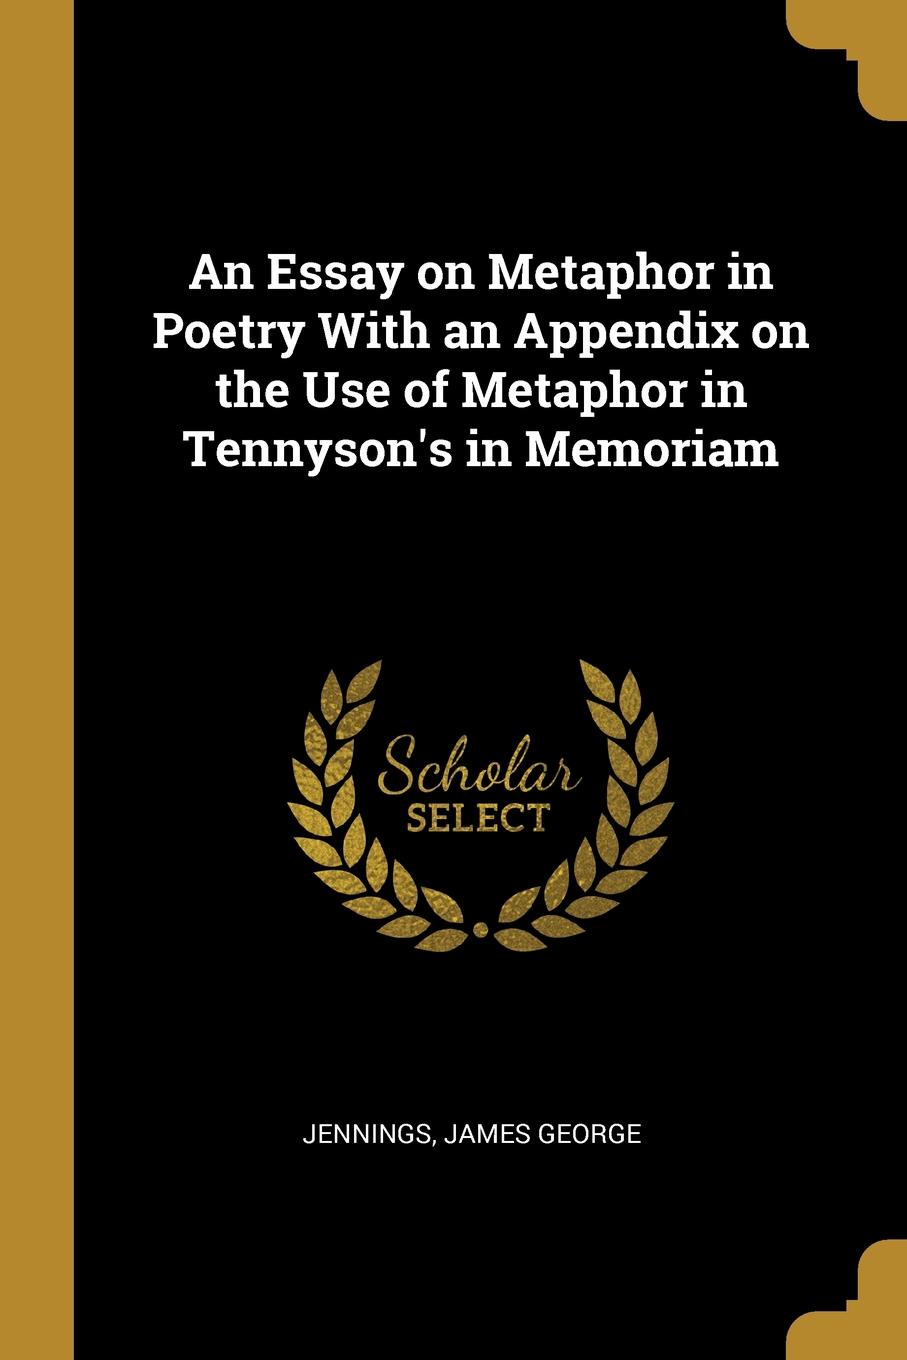 An Essay on Metaphor in Poetry With an Appendix on the Use of Metaphor in Tennyson.s in Memoriam